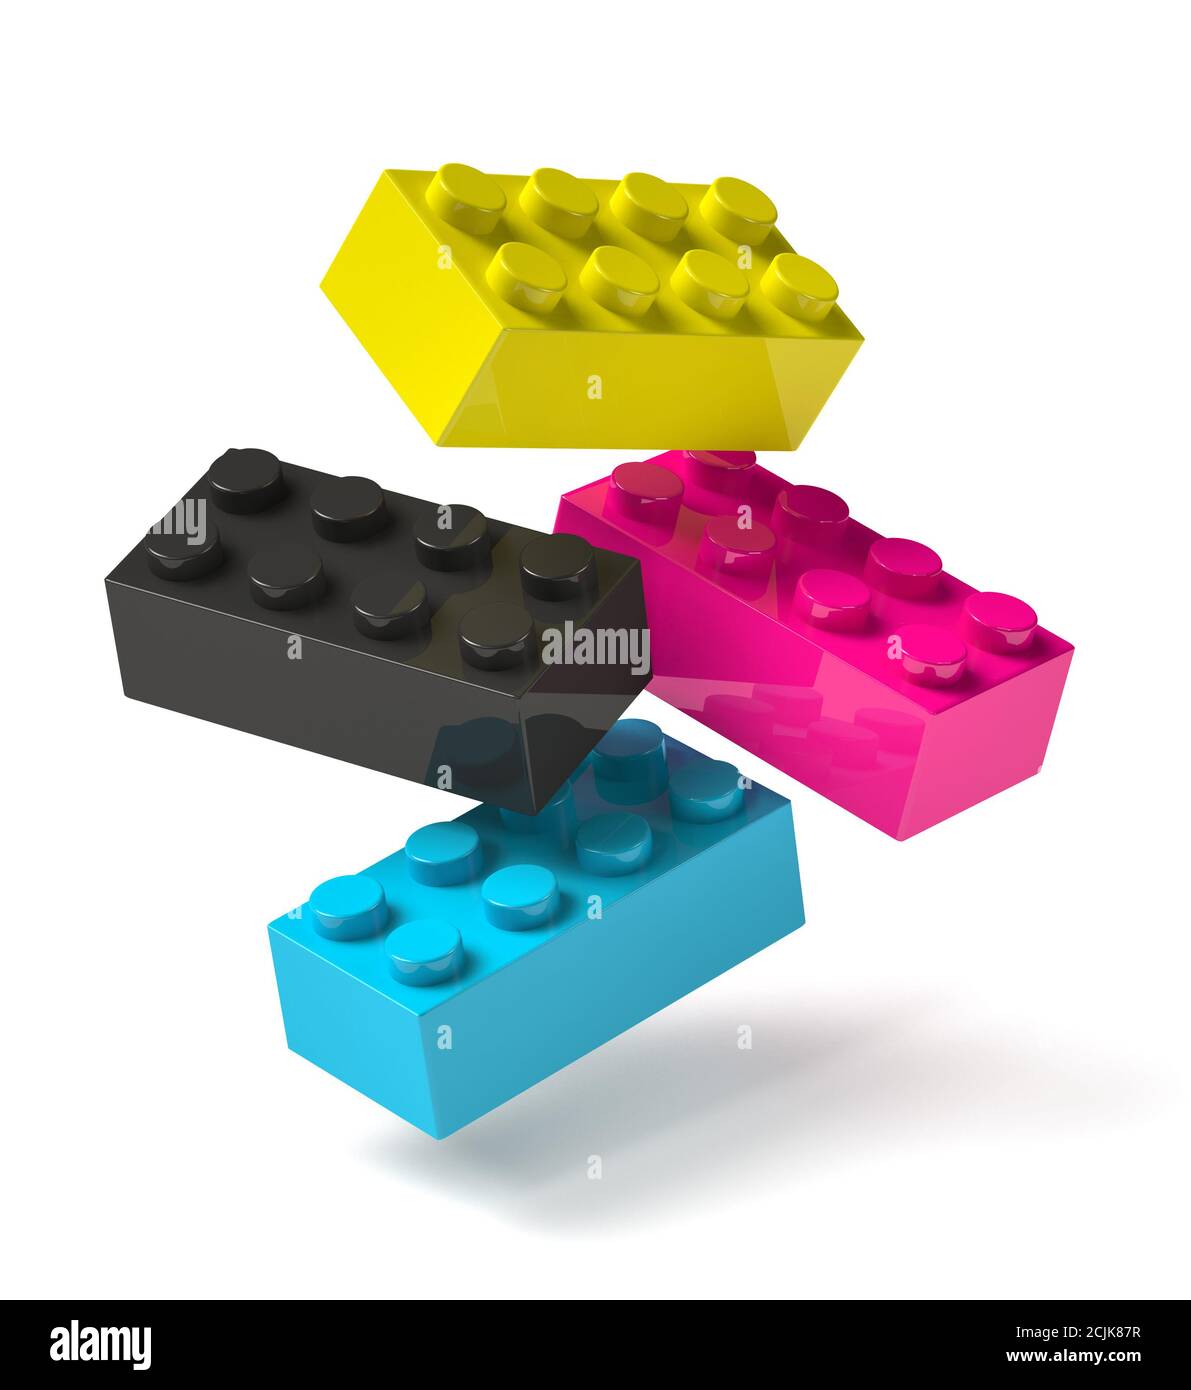 3D toy building blocks of four printing process cmyk colors cyan magenta yellow black flying in mid-air Stock Photo